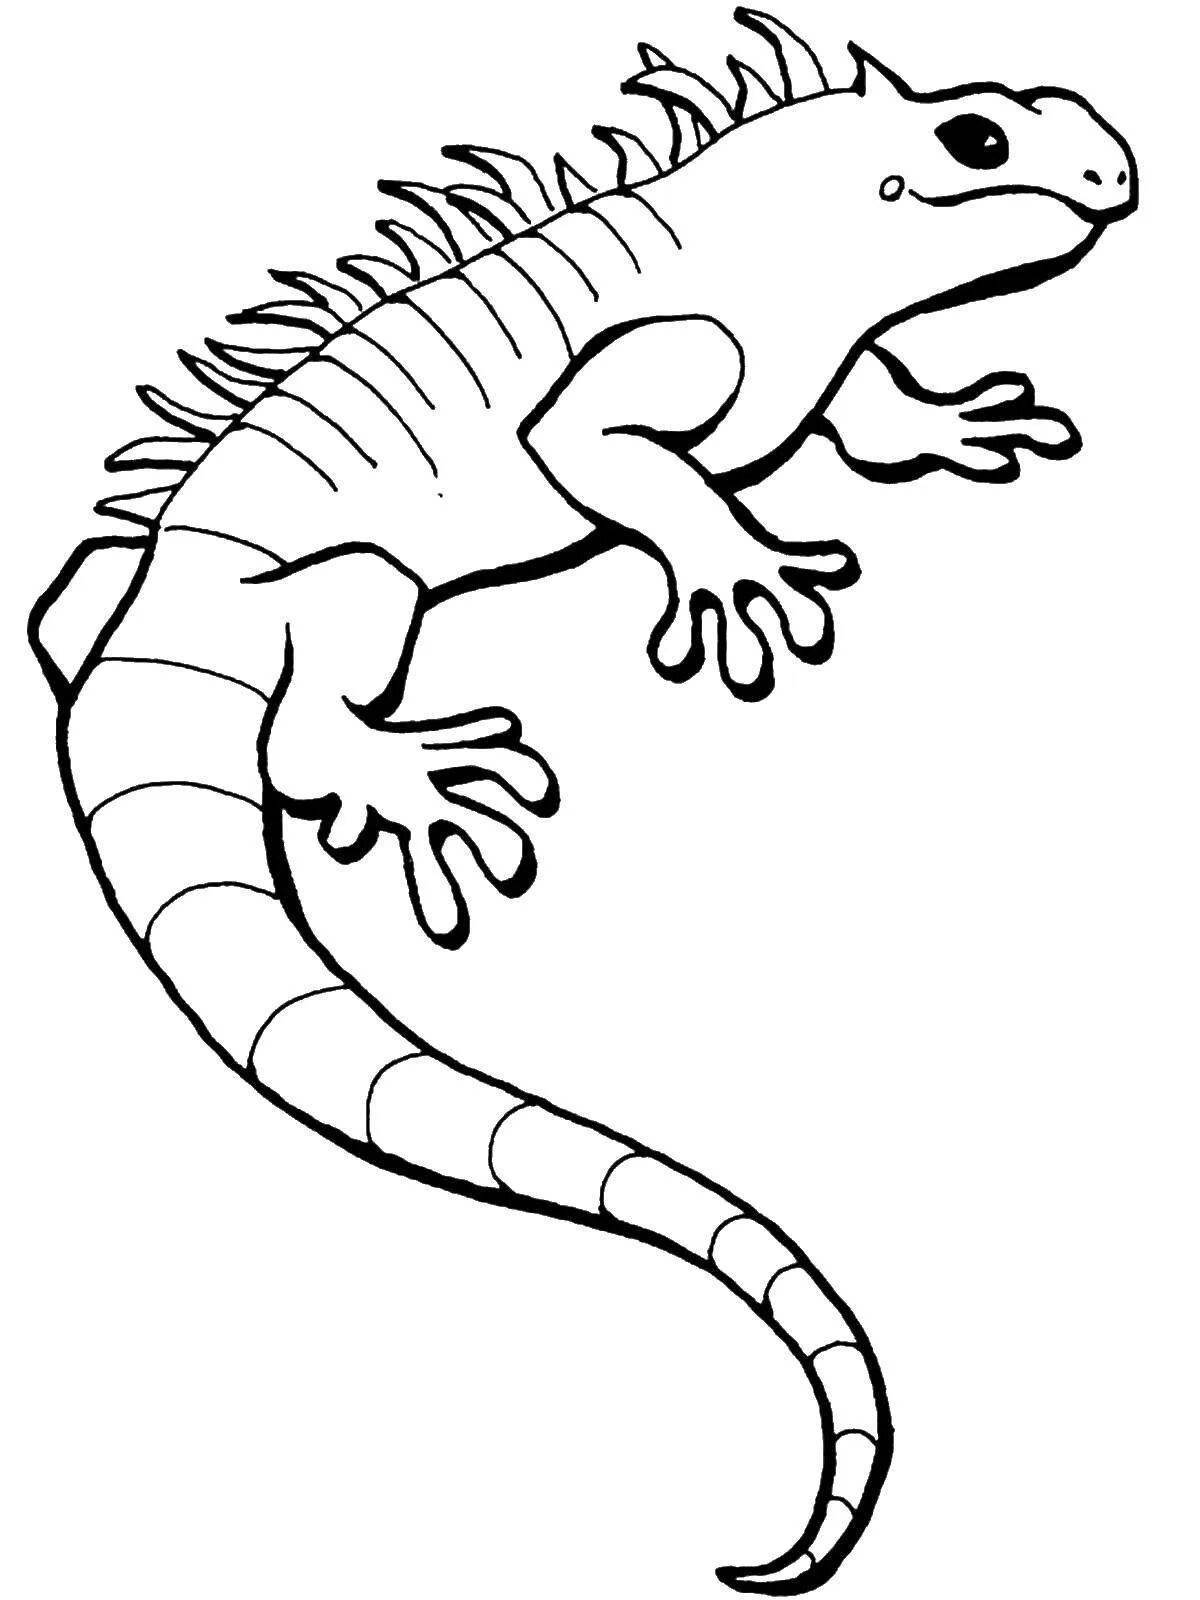 Spectacular iguana coloring page